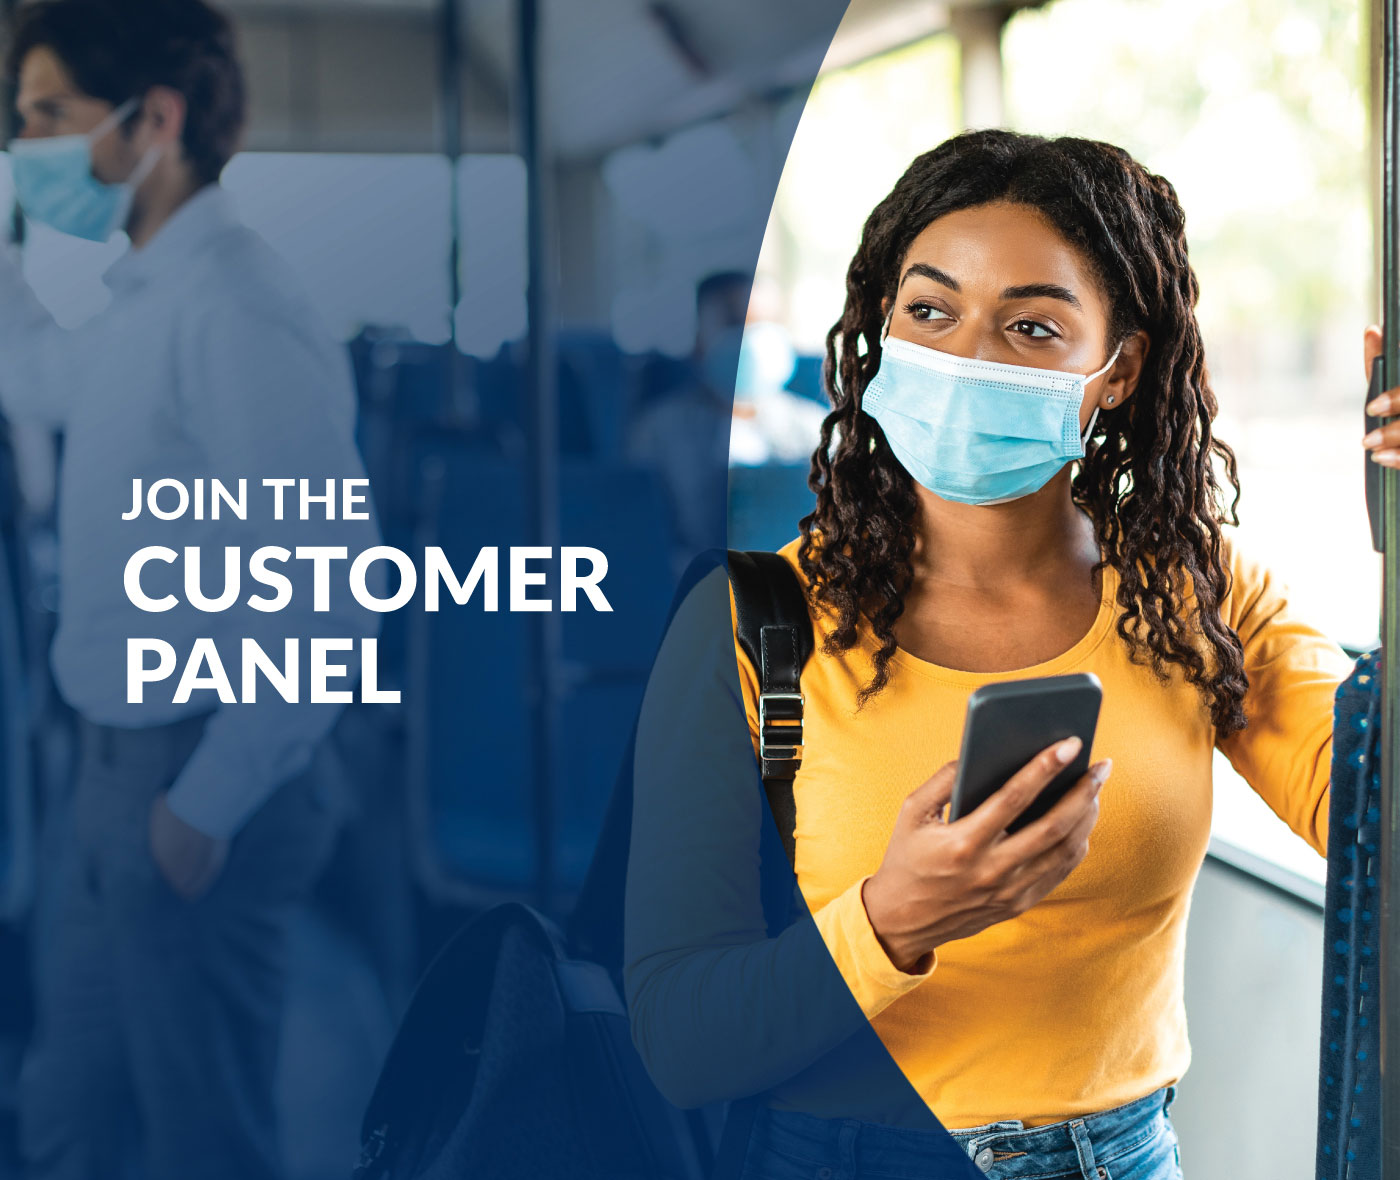 Woman standing on a bus wearing a mask and holding a smartphone with text "Join the customer panel"